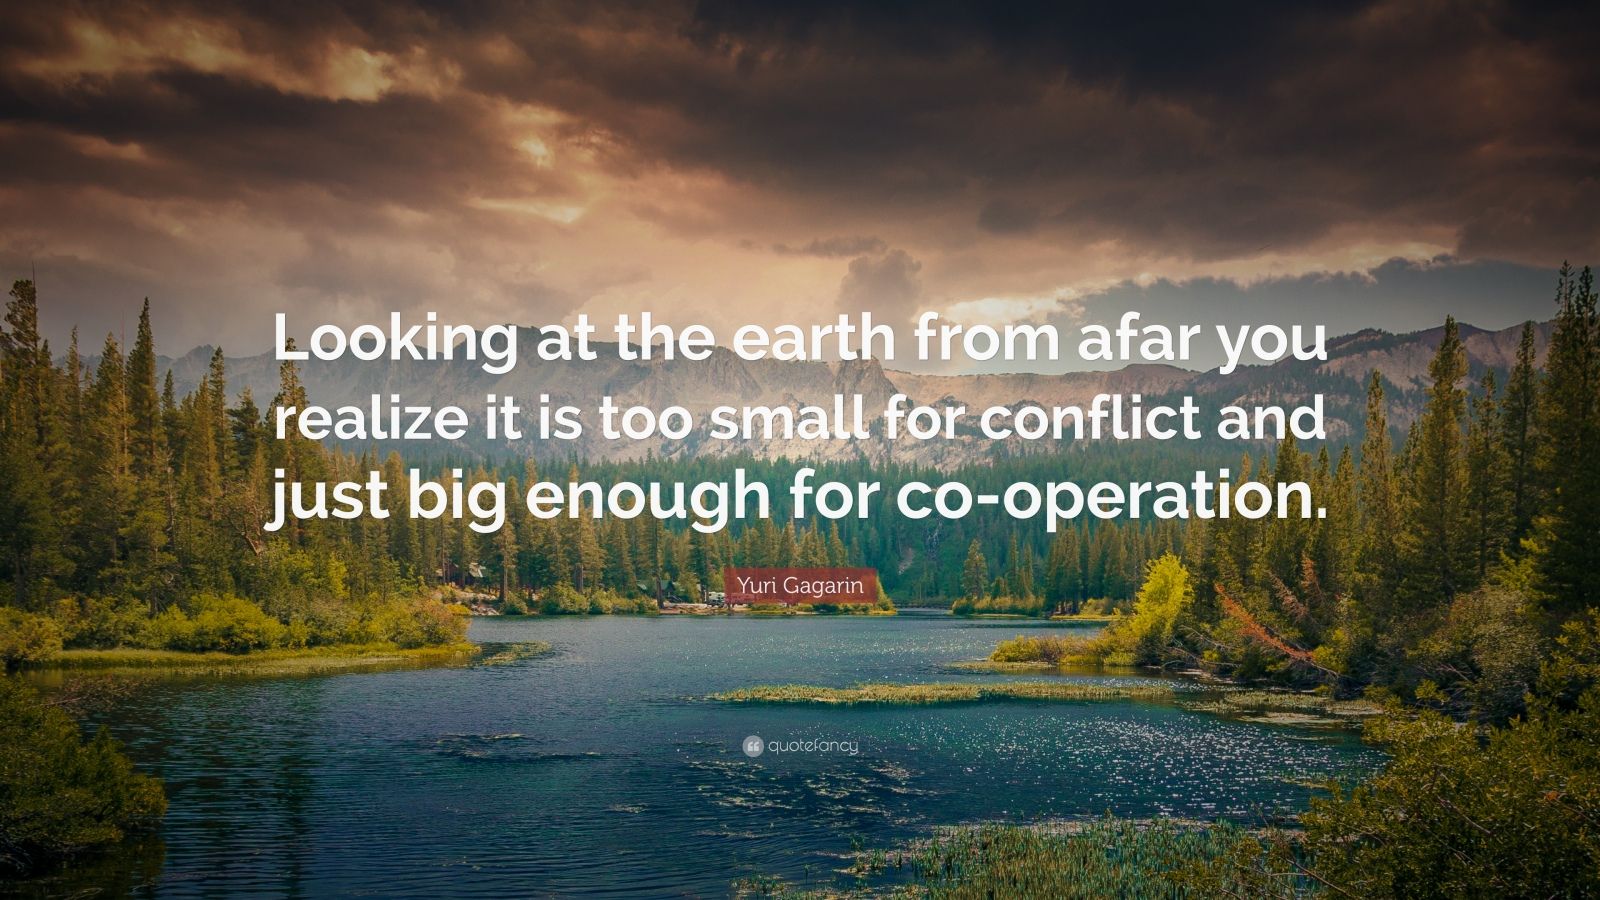 Yuri Gagarin Quote: “Looking at the earth from afar you realize it is